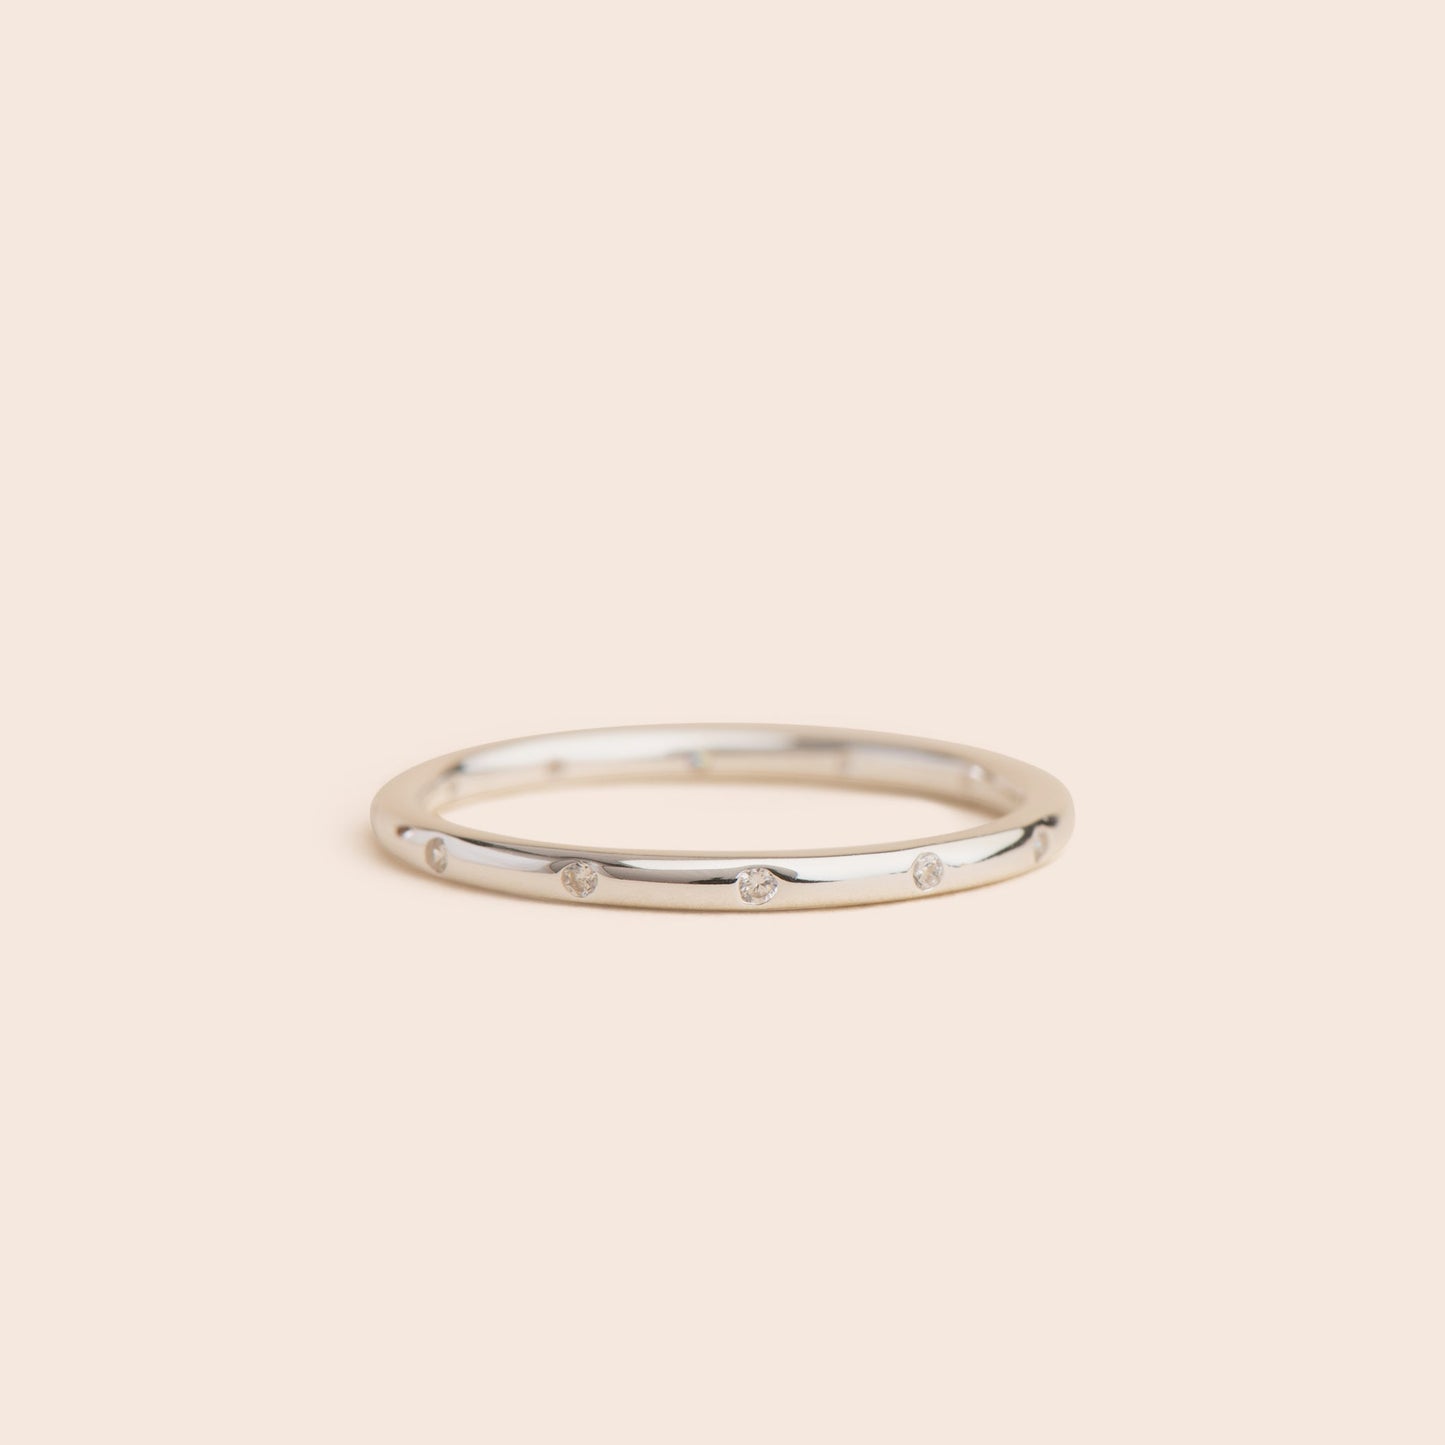 Sparkly CZ band - Sterling Silver Stacking Ring - Gemlet